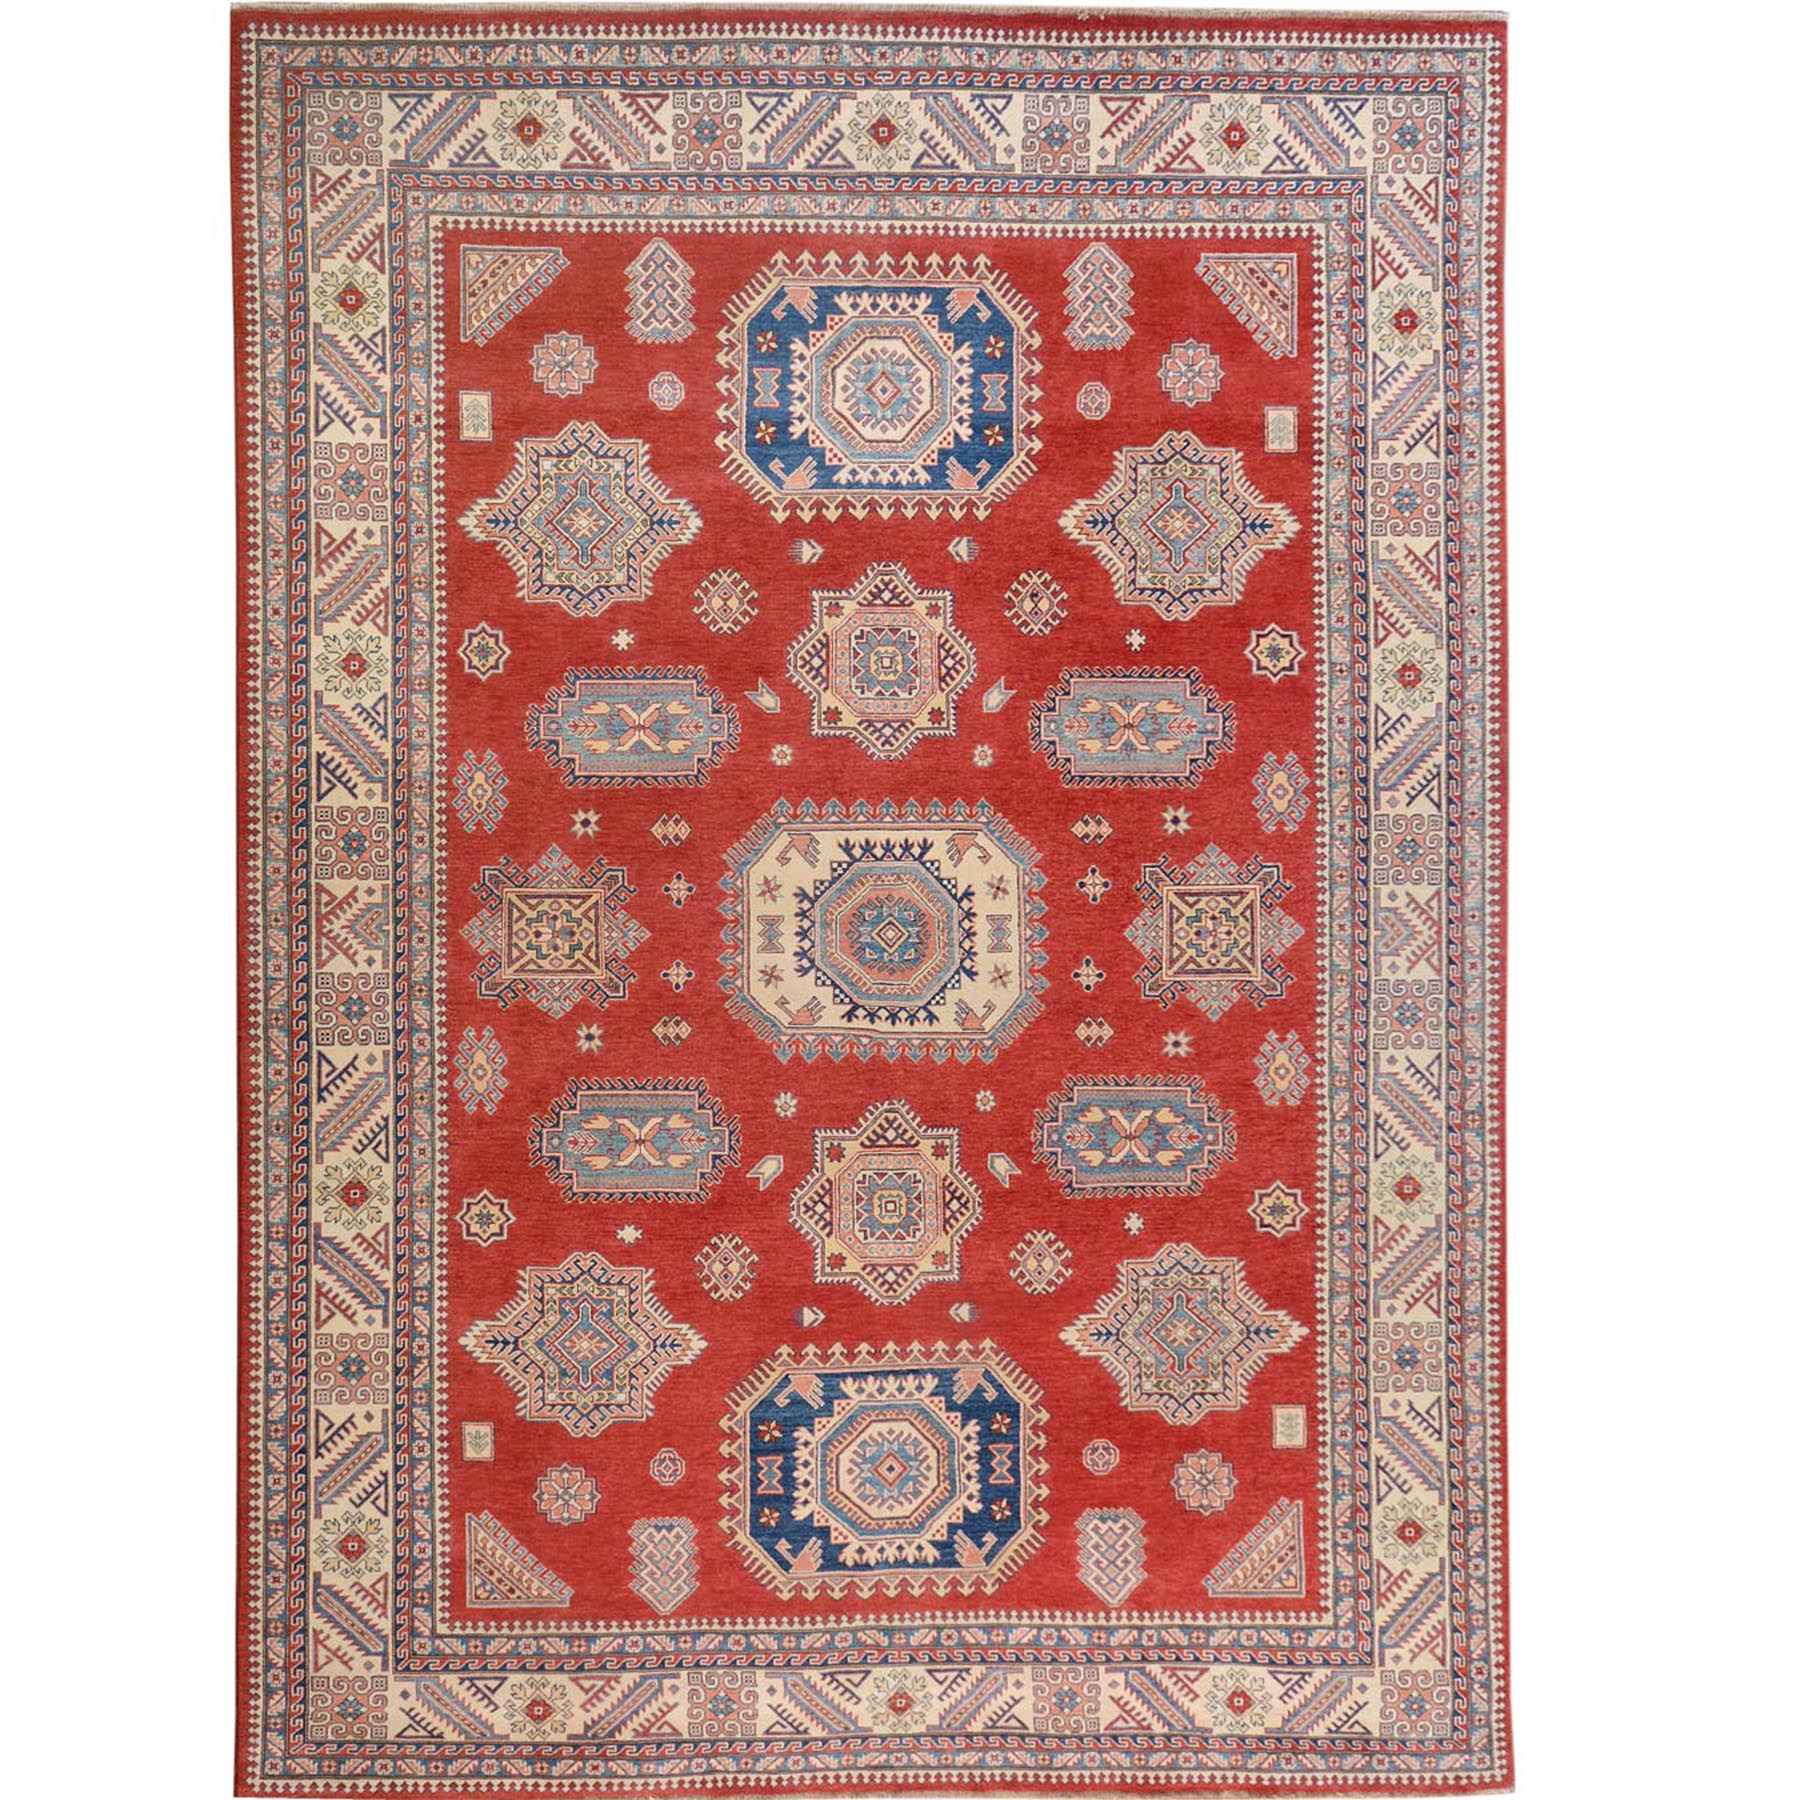 10'X13'10"  Red Special Kazak Tribal Design Pure Wool Hand Knotted Oriental Rug moae70a8